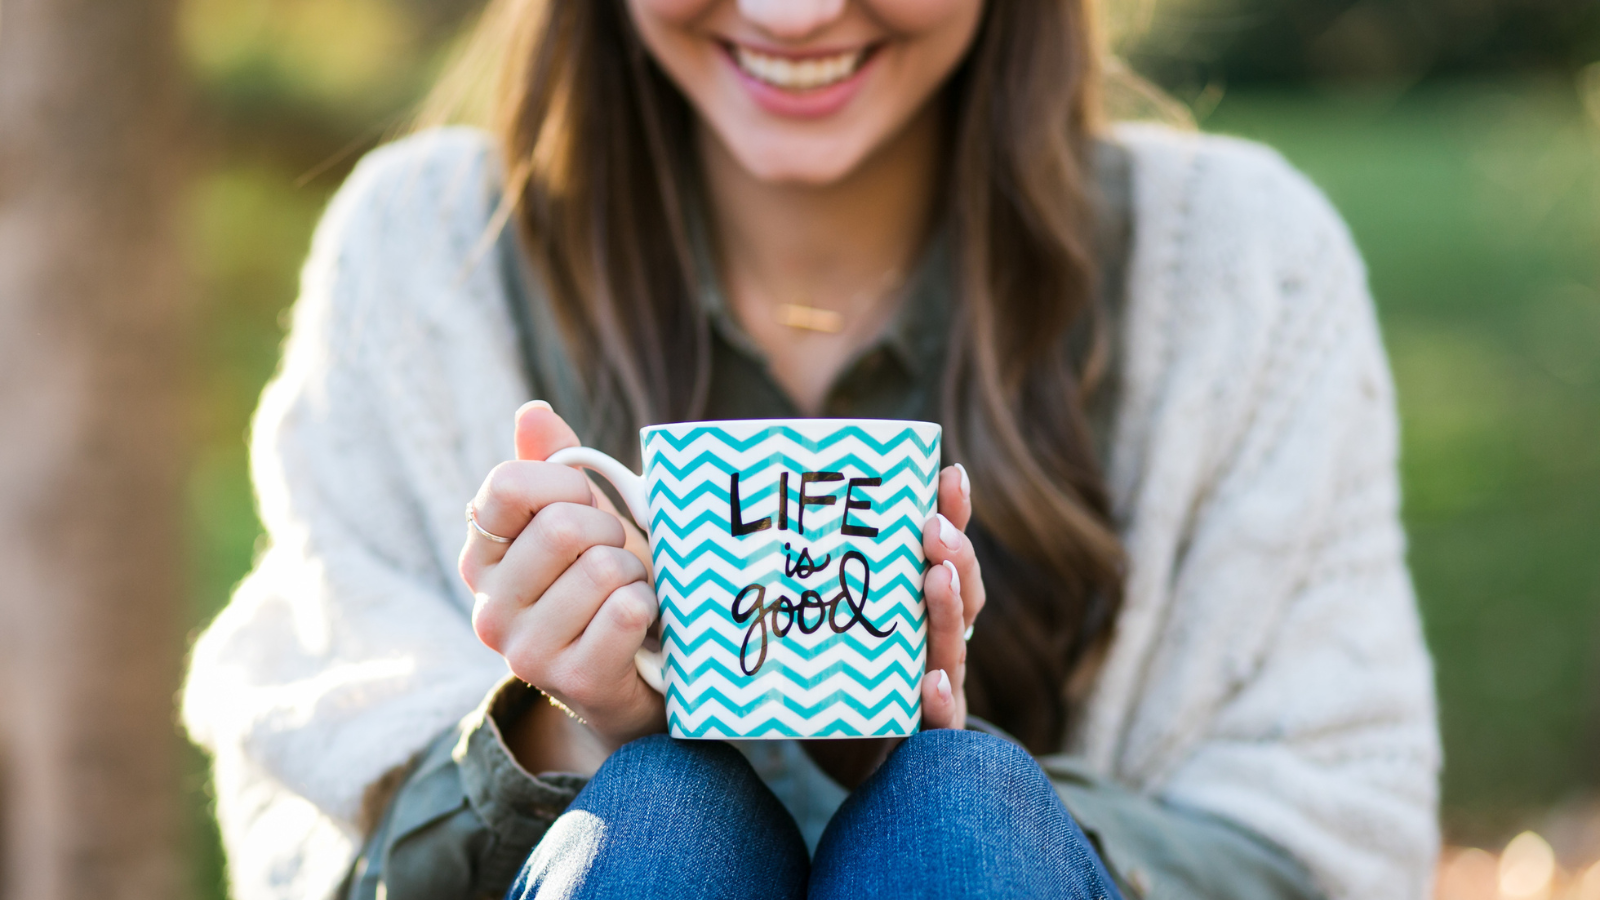 A woman holding a mug that says "life is good".